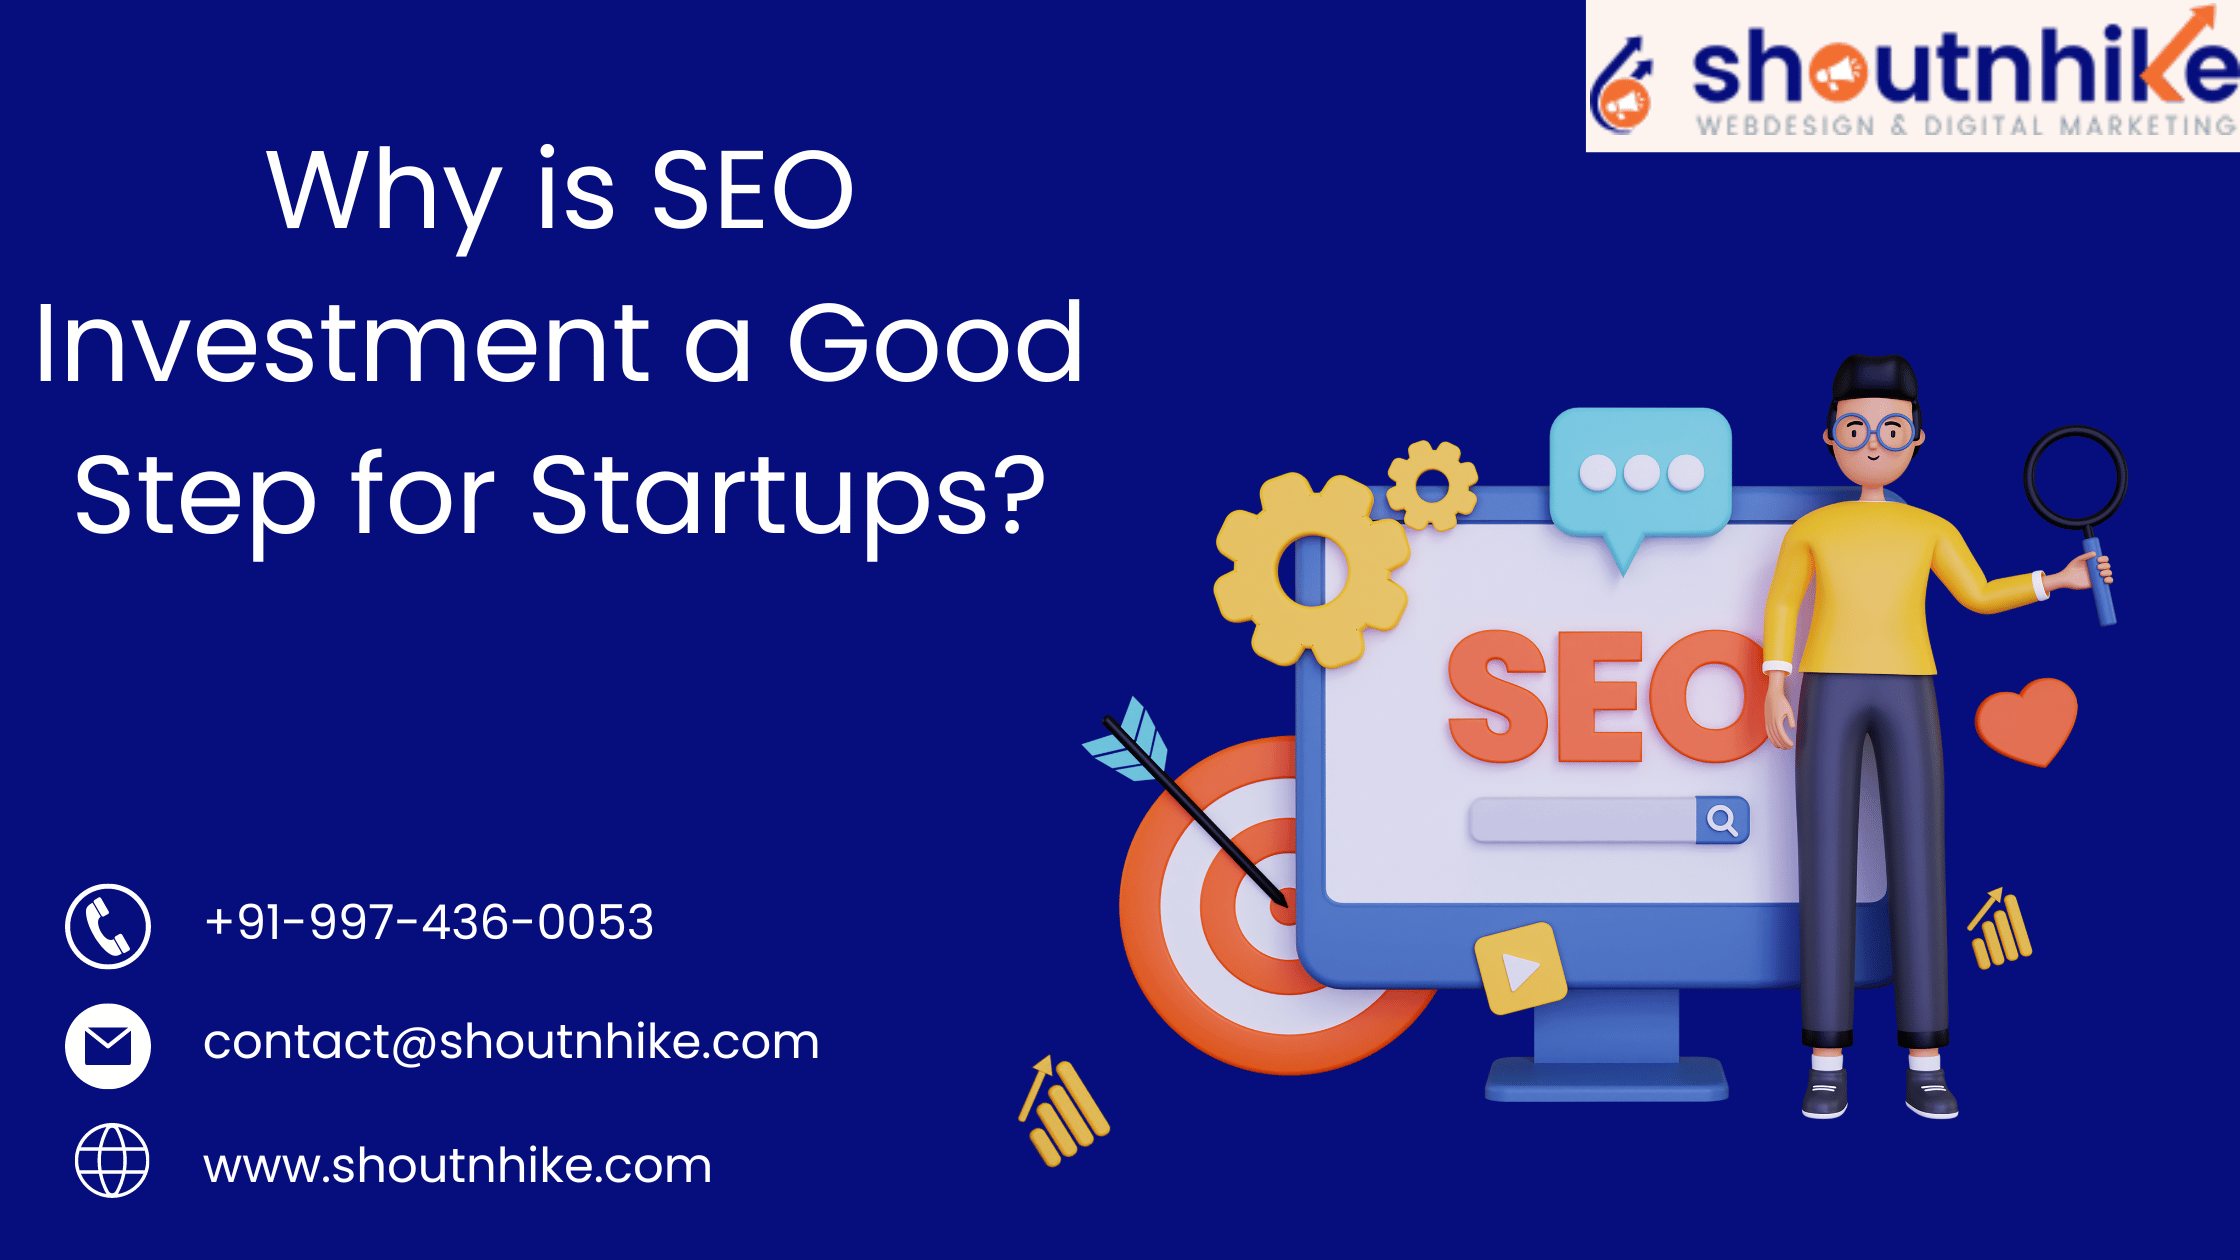 Why is Seo Investment a Good Step for Startups?